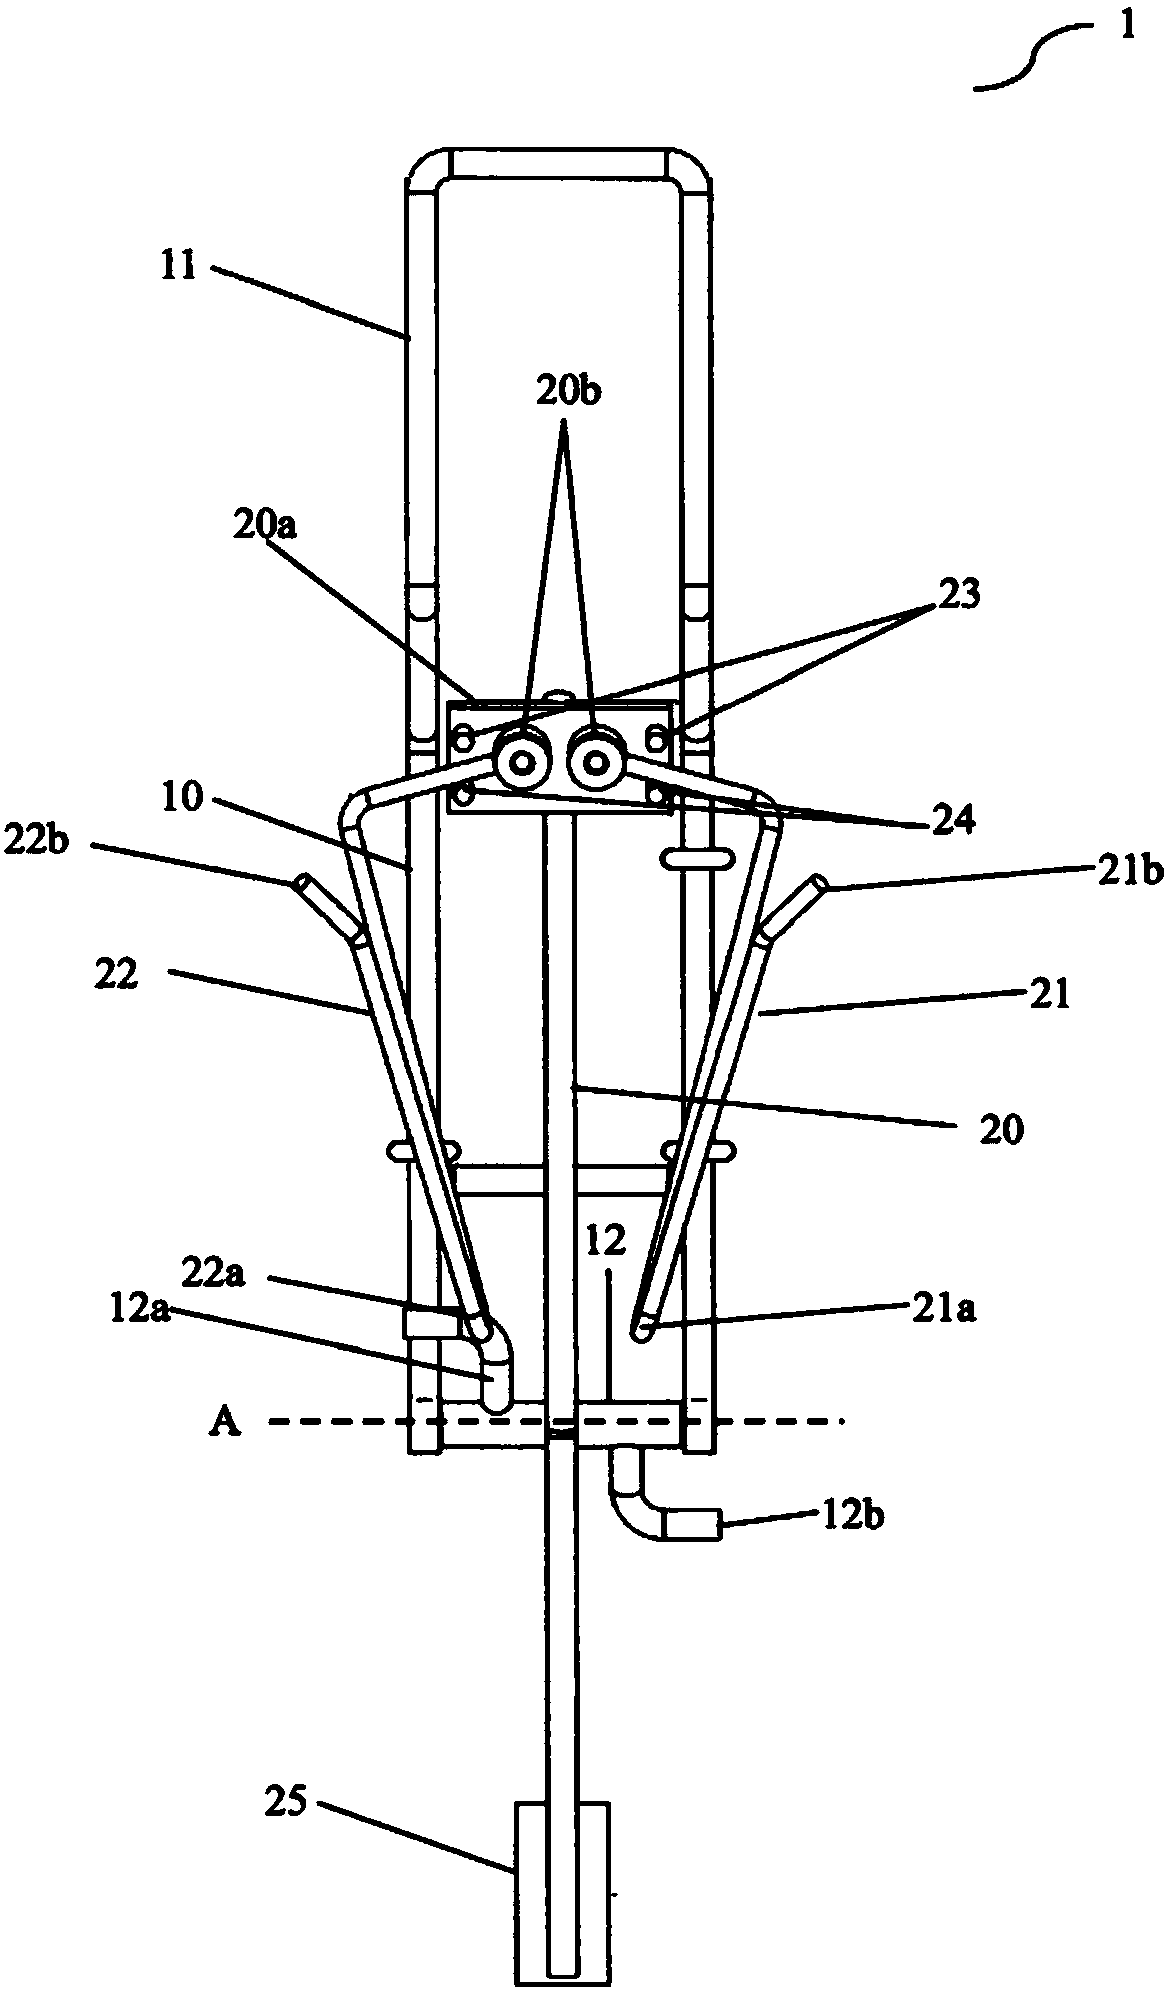 Method, device and system for handling, grading and vaccinating living birds